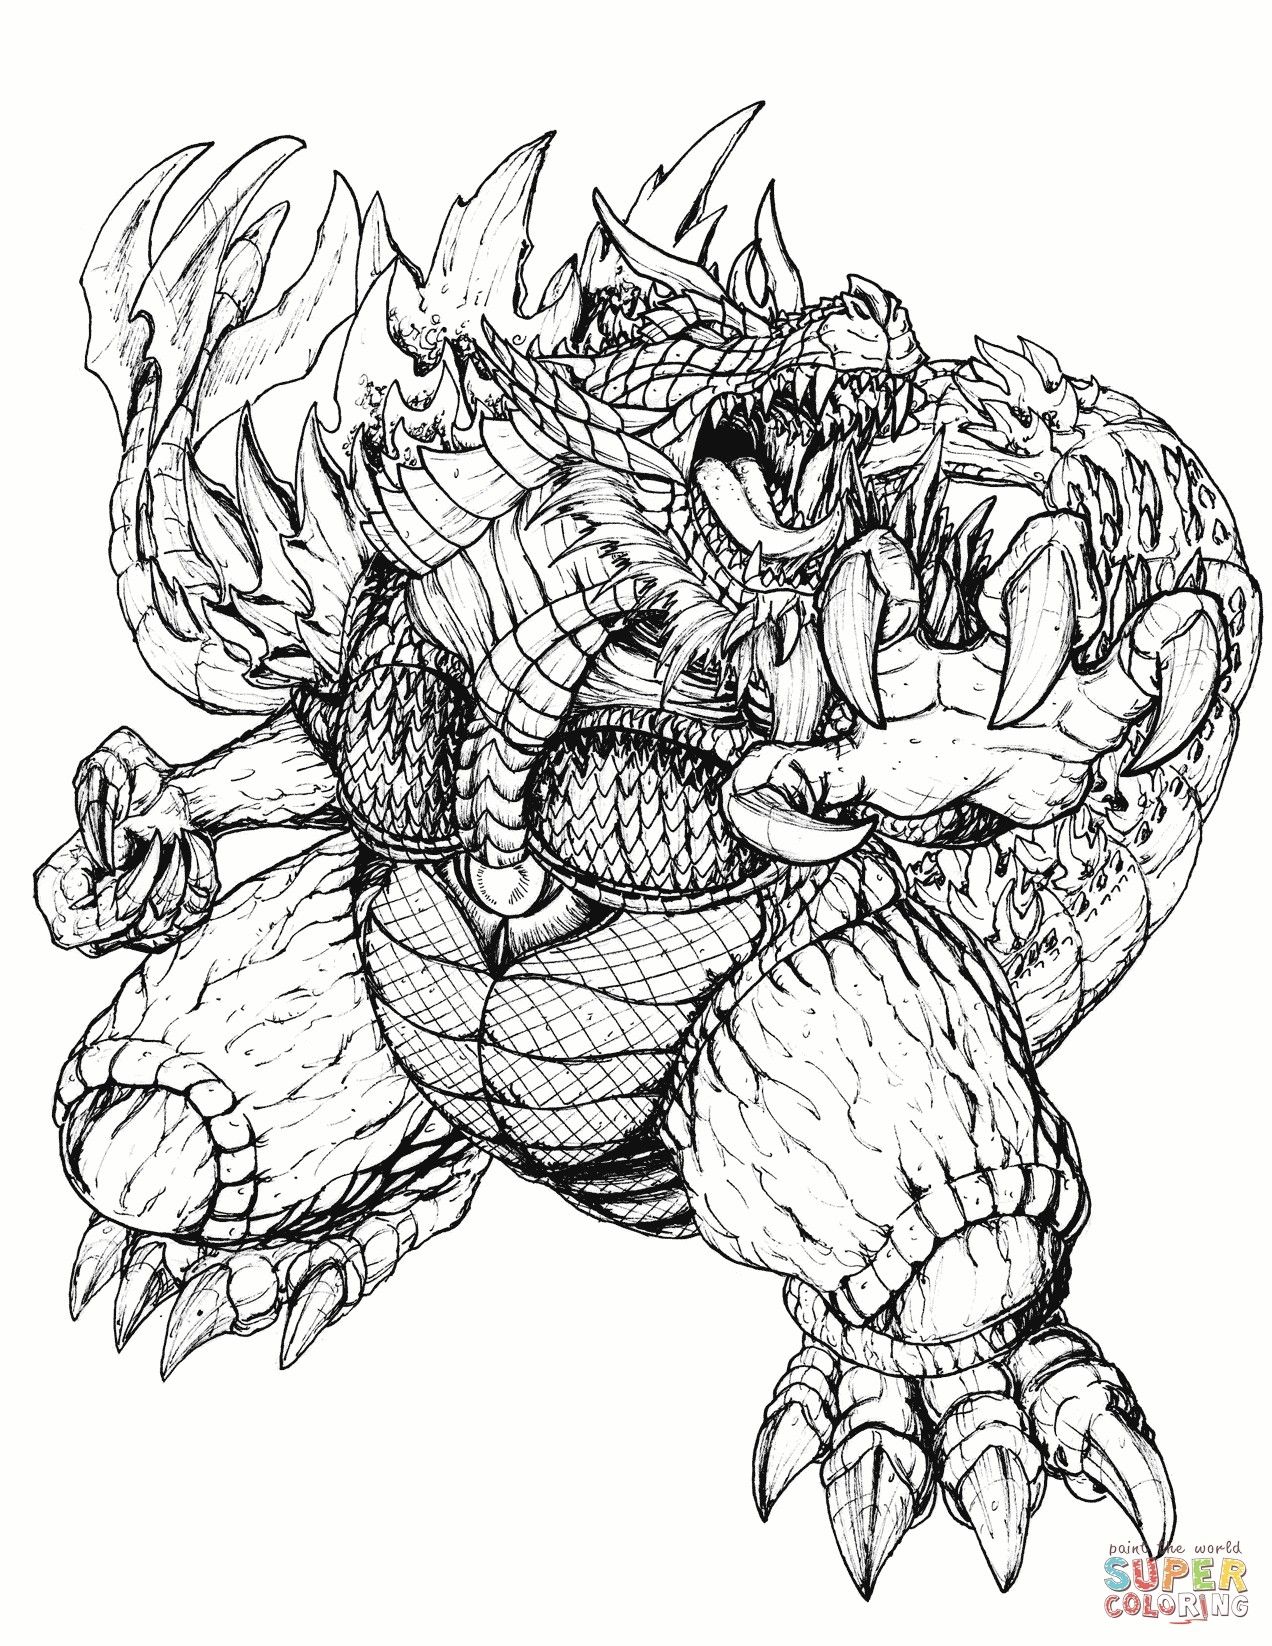 Godzilla Coloring Pages at GetColorings.com | Free ...